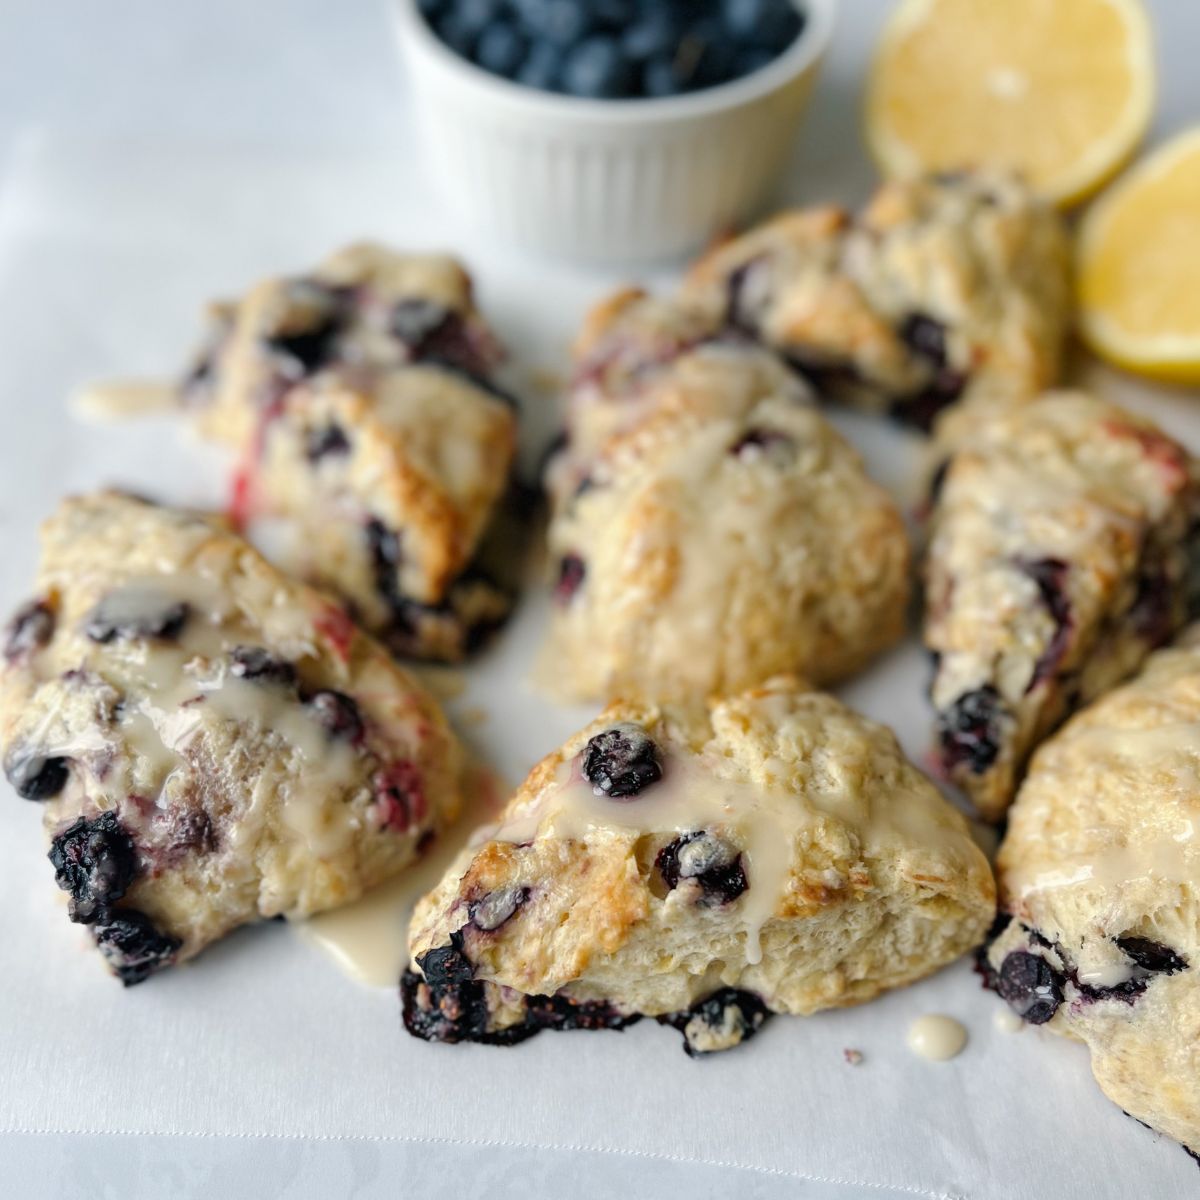 lemon blueberry scones on parchment paper with lemons and blueberries in the background.